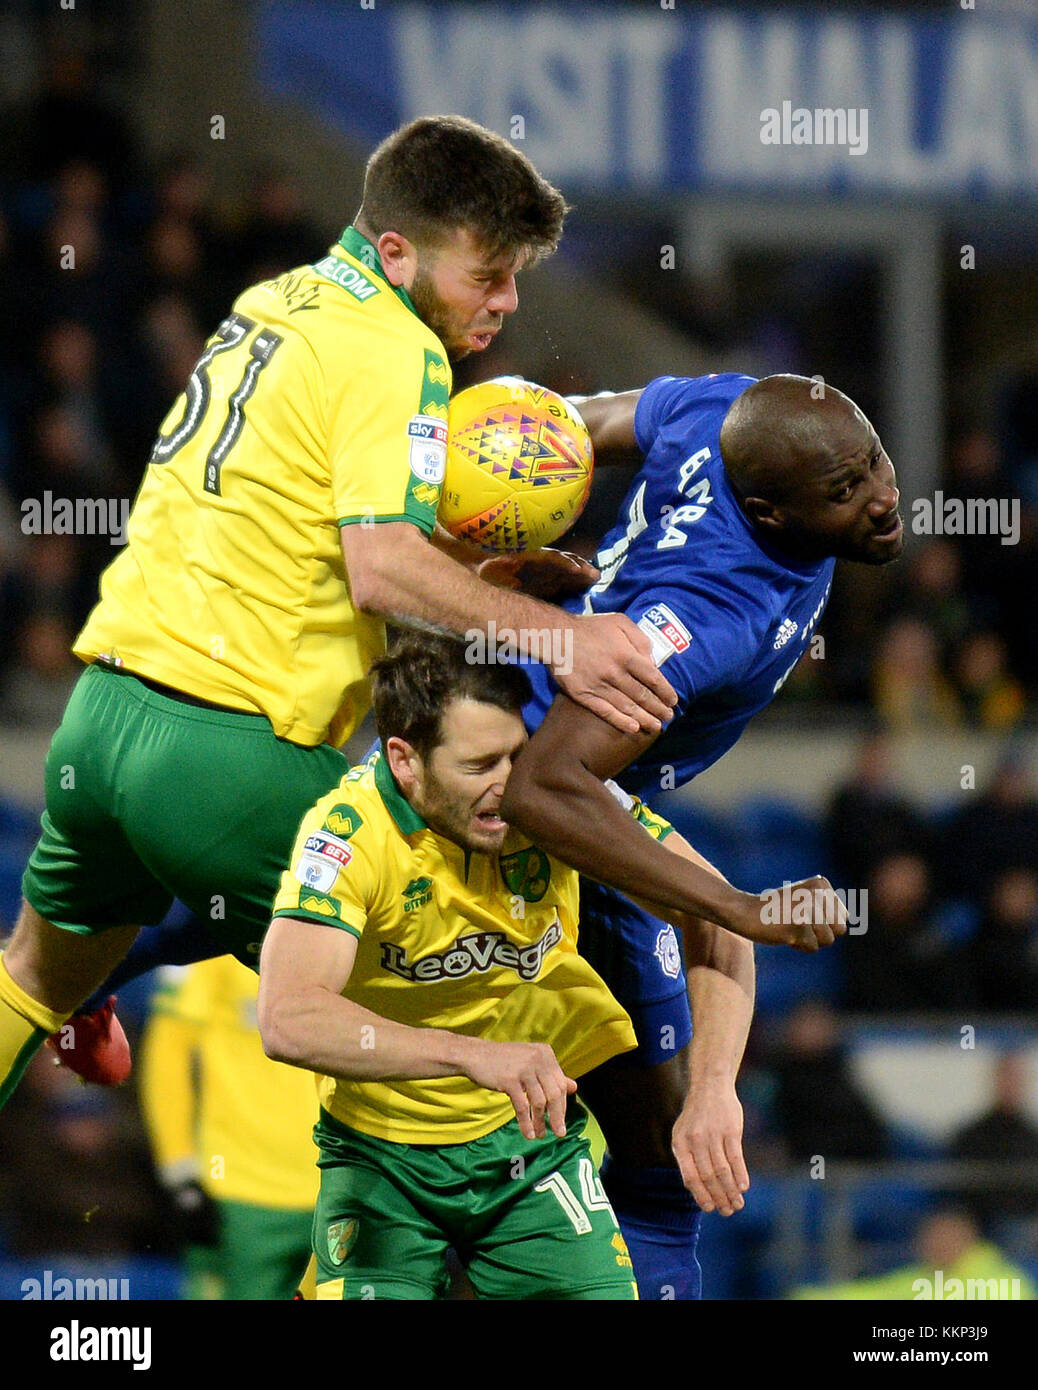 Norwich City's Grant Hanley (top left) and Wes Hoolahan battle for the ball with Cardiff City's Sol Bamba during the Sky Bet Championship match at the Cardiff City Stadium, Cardiff. PRESS ASSOCIATION Photo Picture date: Friday December 1, 2017. See PA story SOCCER Cardiff. Photo credit should read: Simon Galloway/PA Wire. RESTICTIONS: No use with unauthorised audio, video, data, fixture lists, club/league logos or 'live' services. Online in-match use limited to 75 images, no video emulation. No use in betting, games or single club/league/player publications. Stock Photo